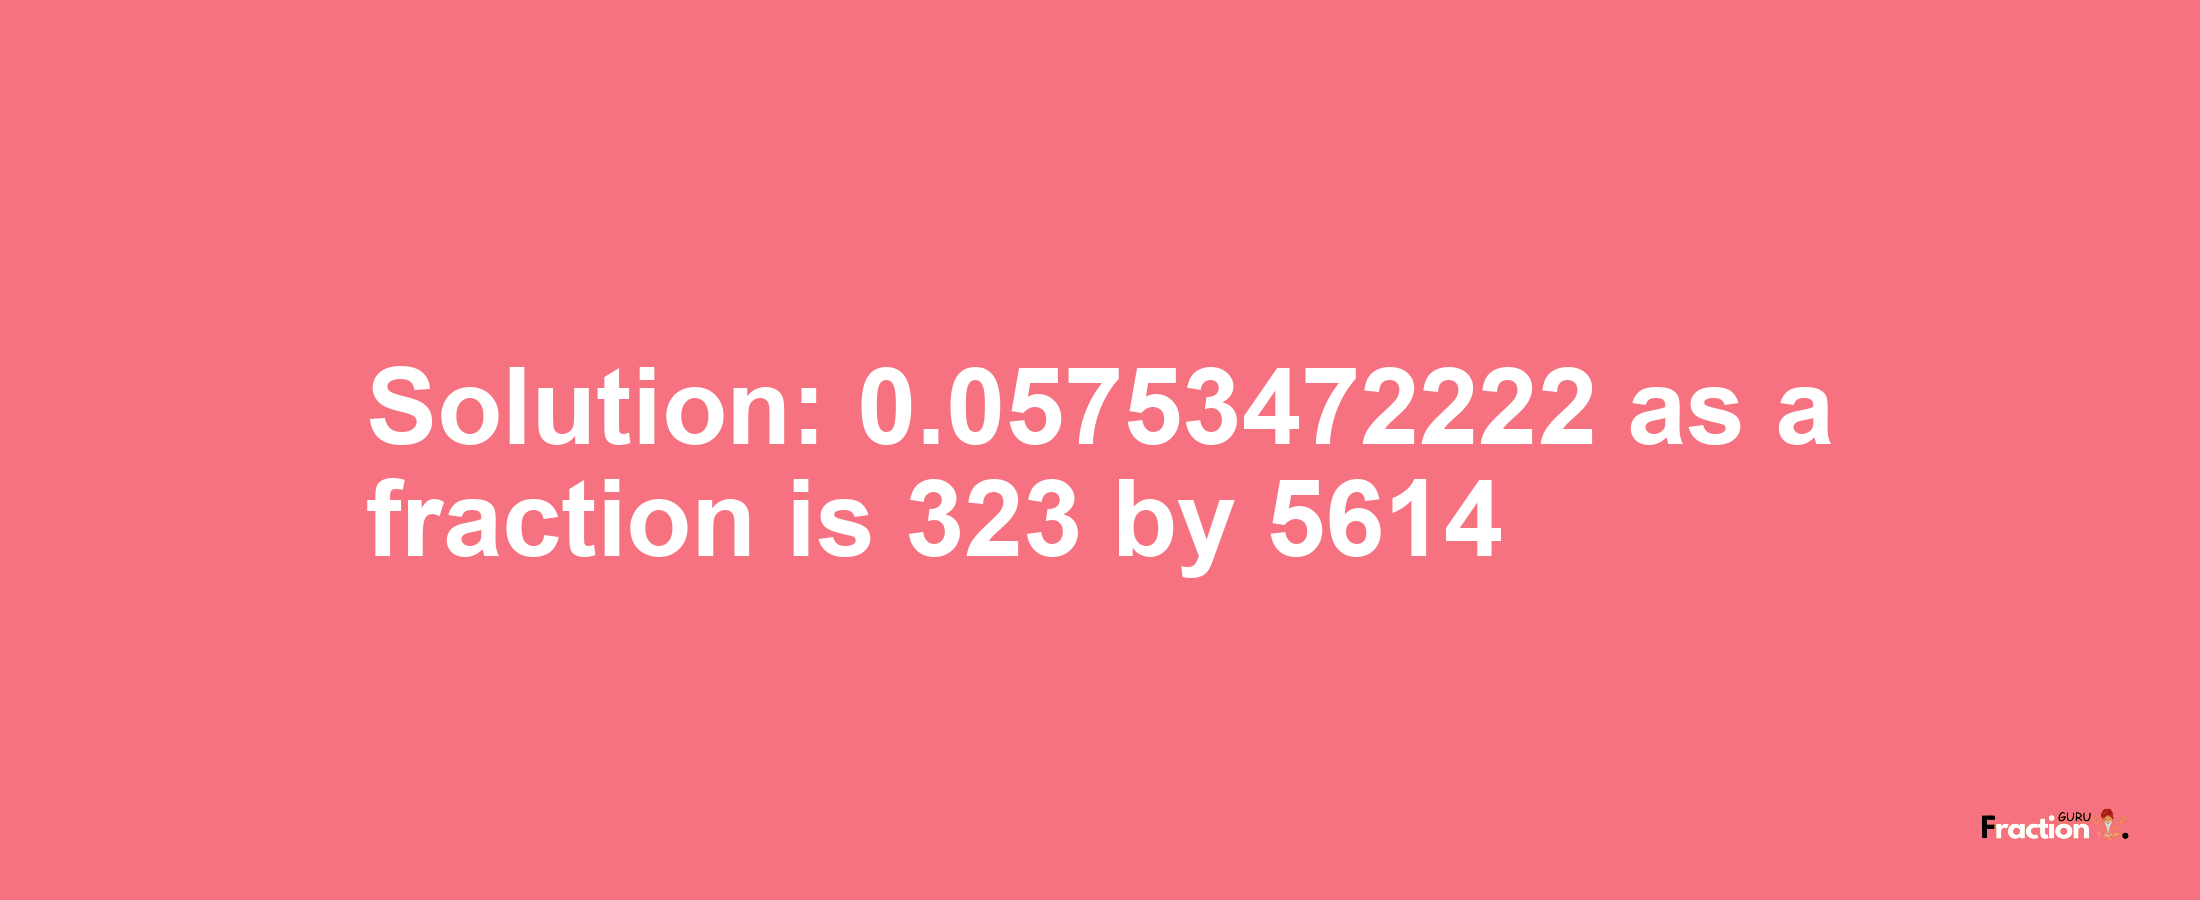 Solution:0.05753472222 as a fraction is 323/5614